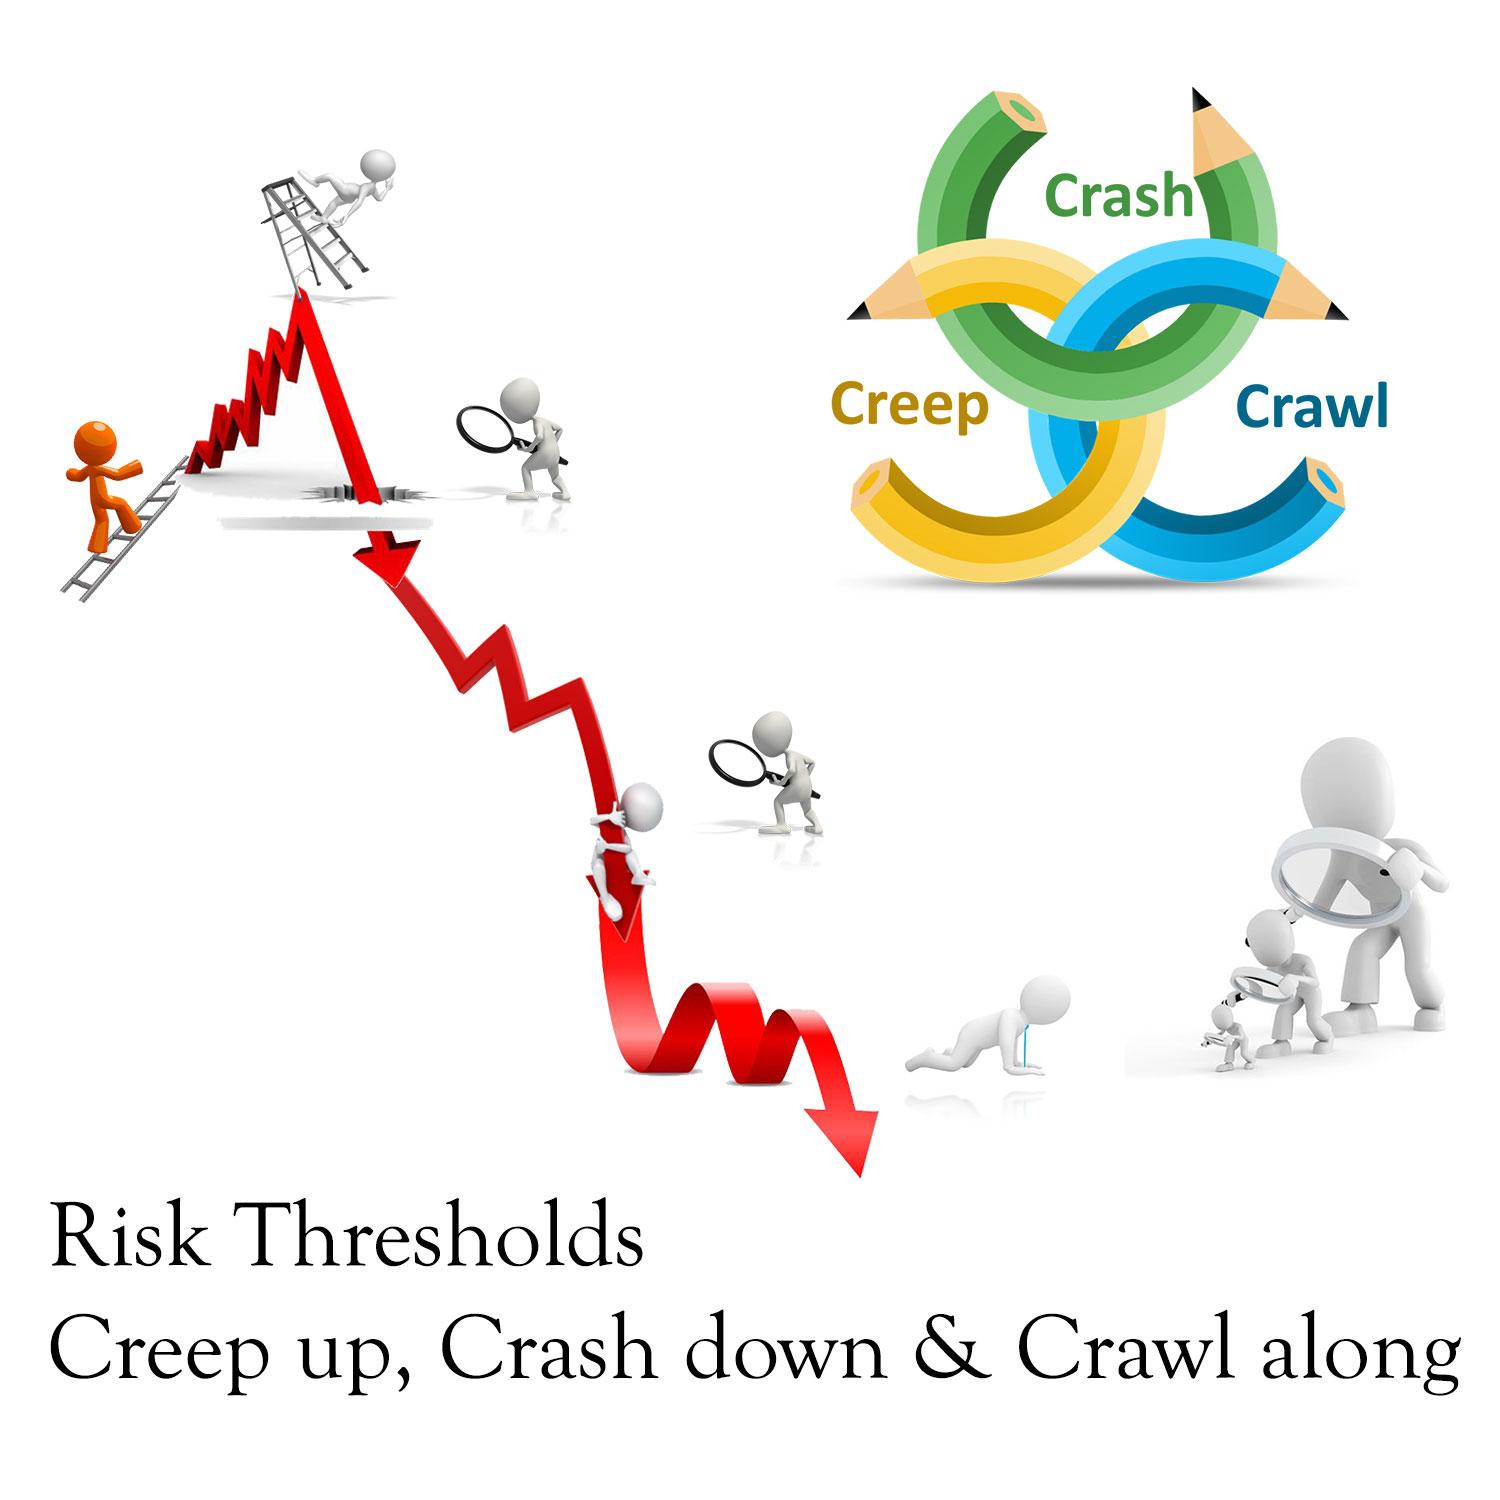 Creep Crash Crawl - Essential knowledge to ground risk thresholds in suicide risk assessments